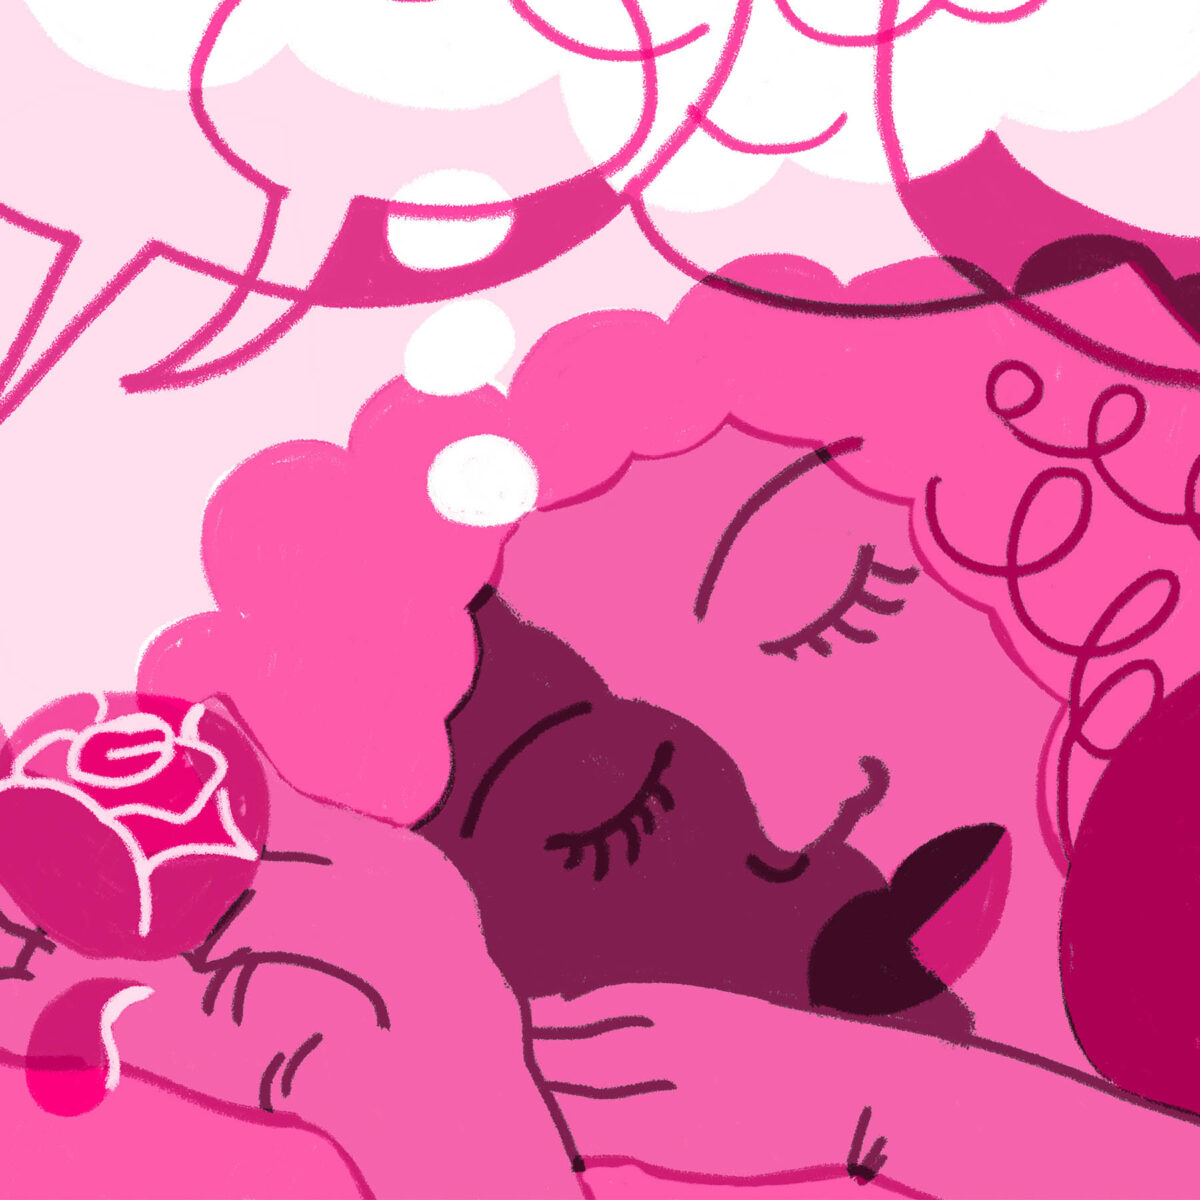 Illustration of a dreaming woman, drawn in shades of pink.